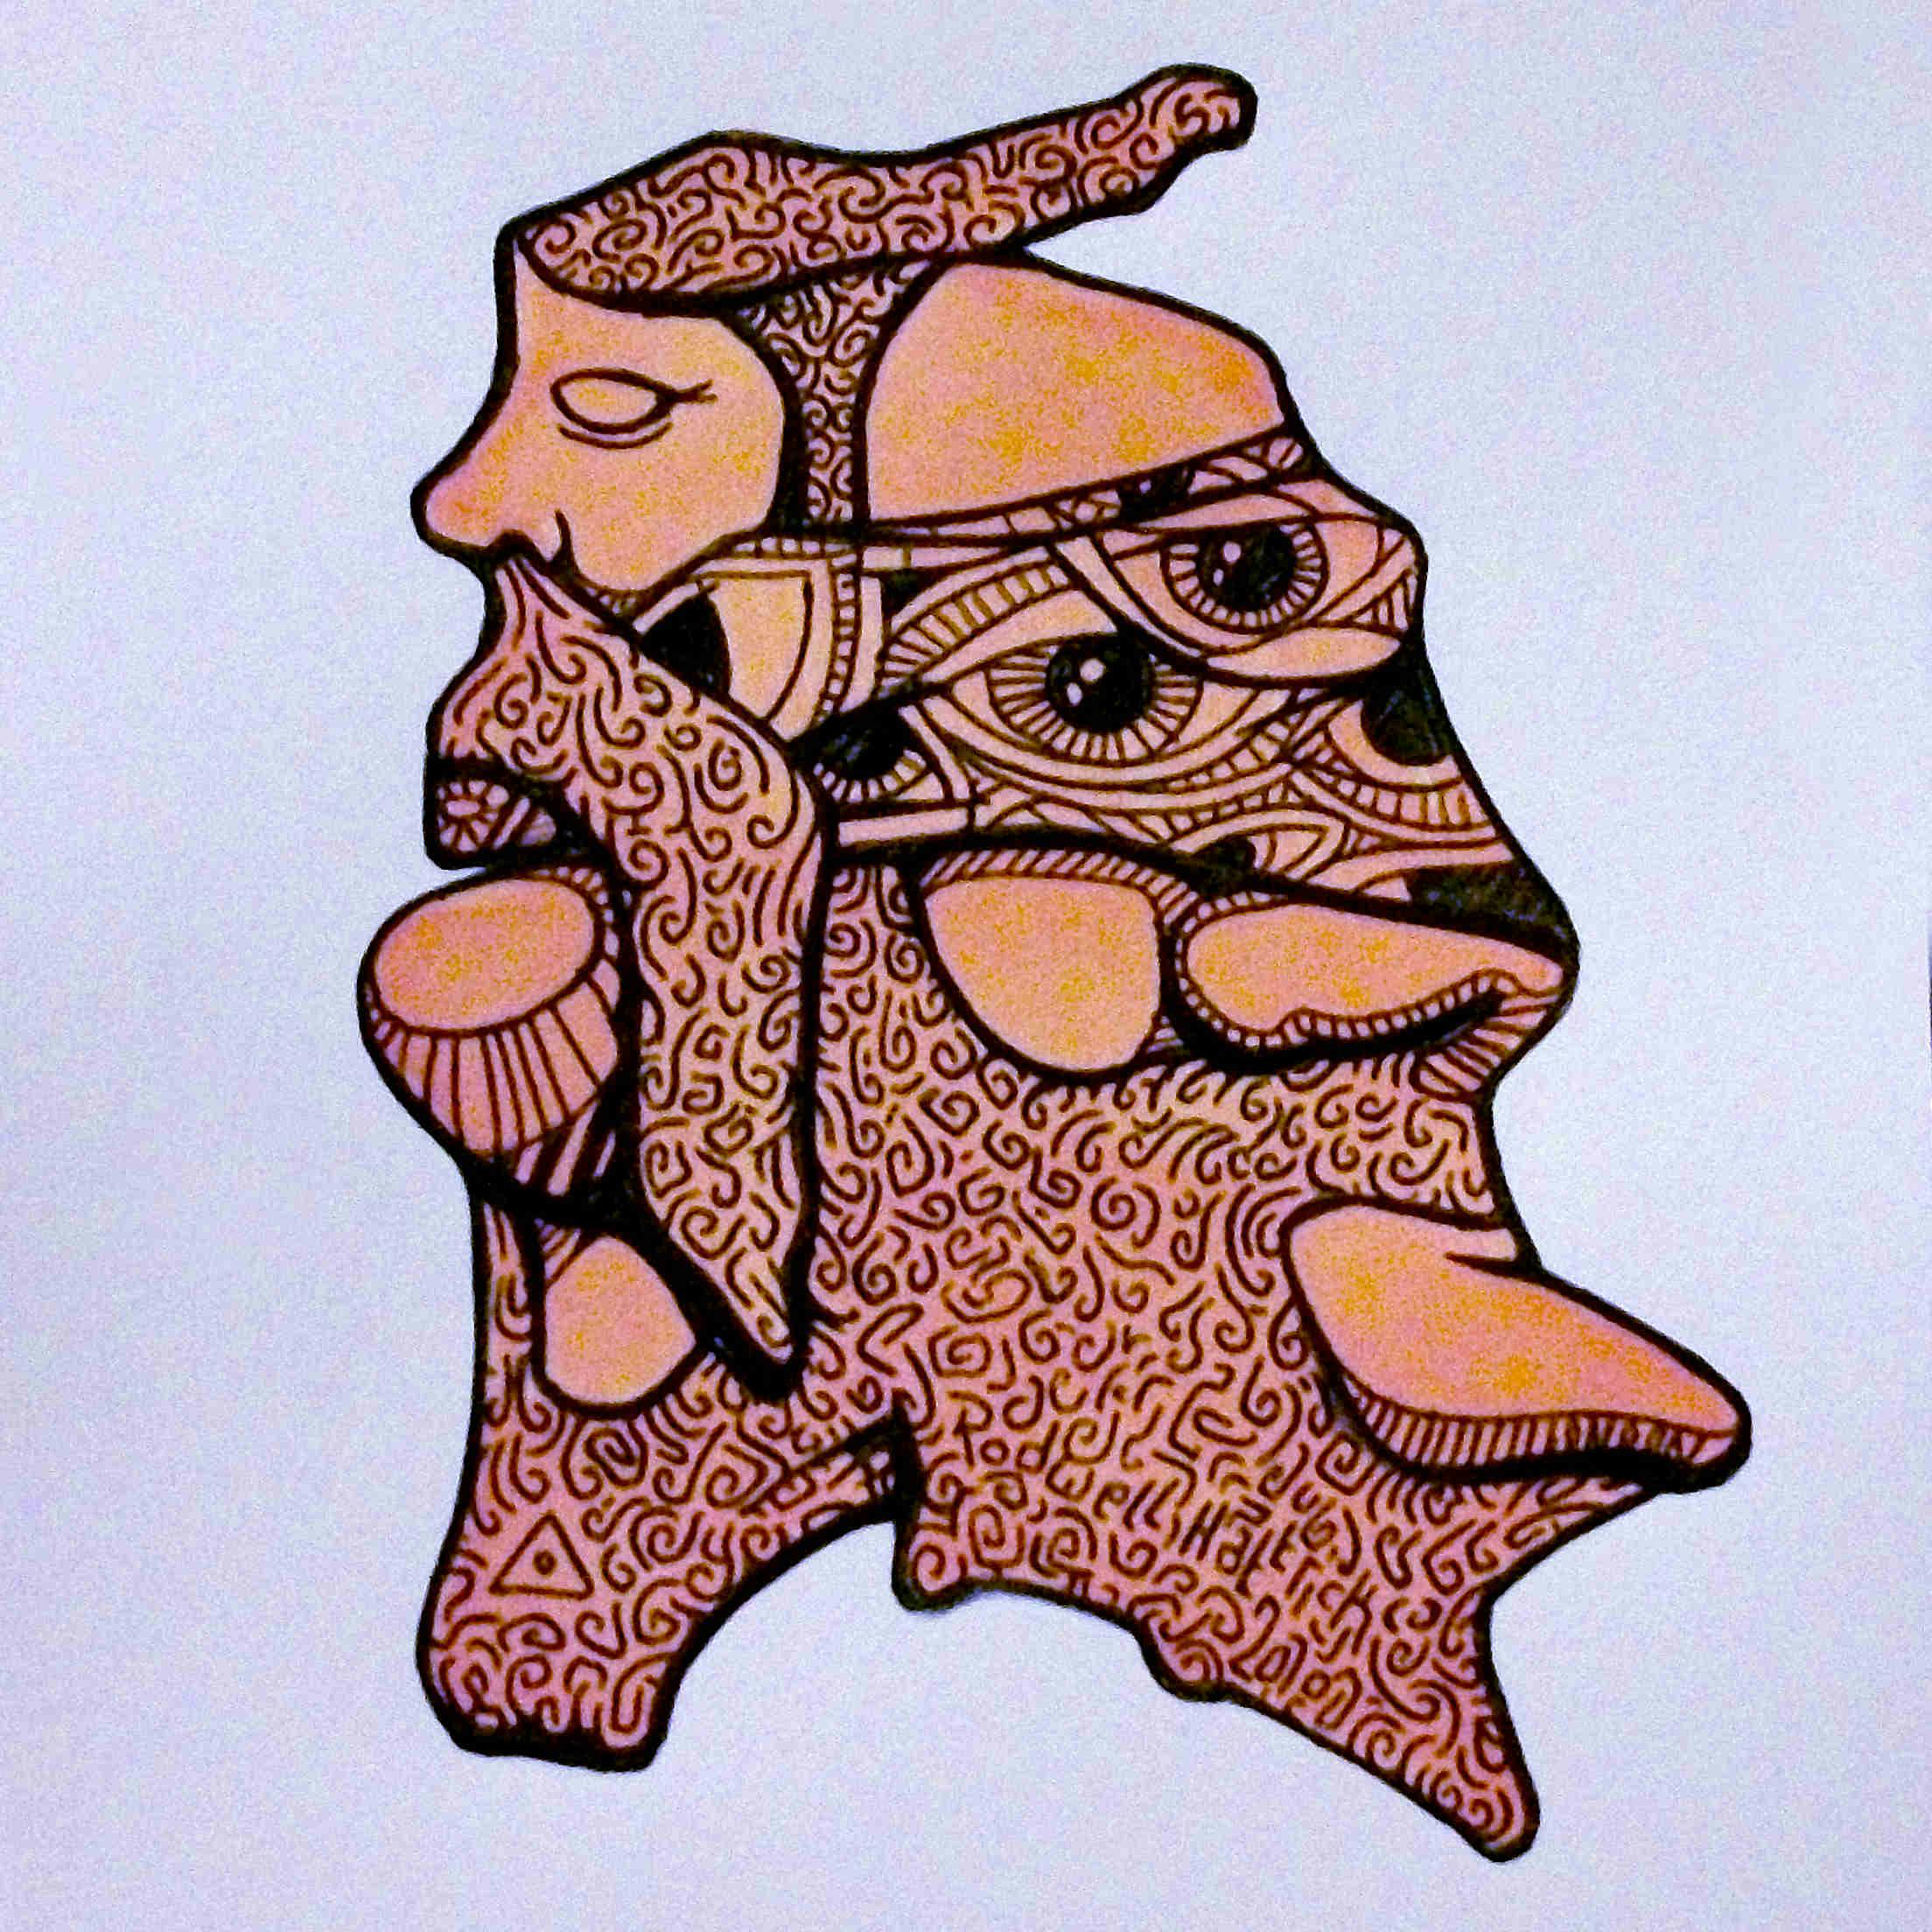 Ink drawing of an unusual face with a blindfold covering the eyes, with eyes printed on the blindfold.